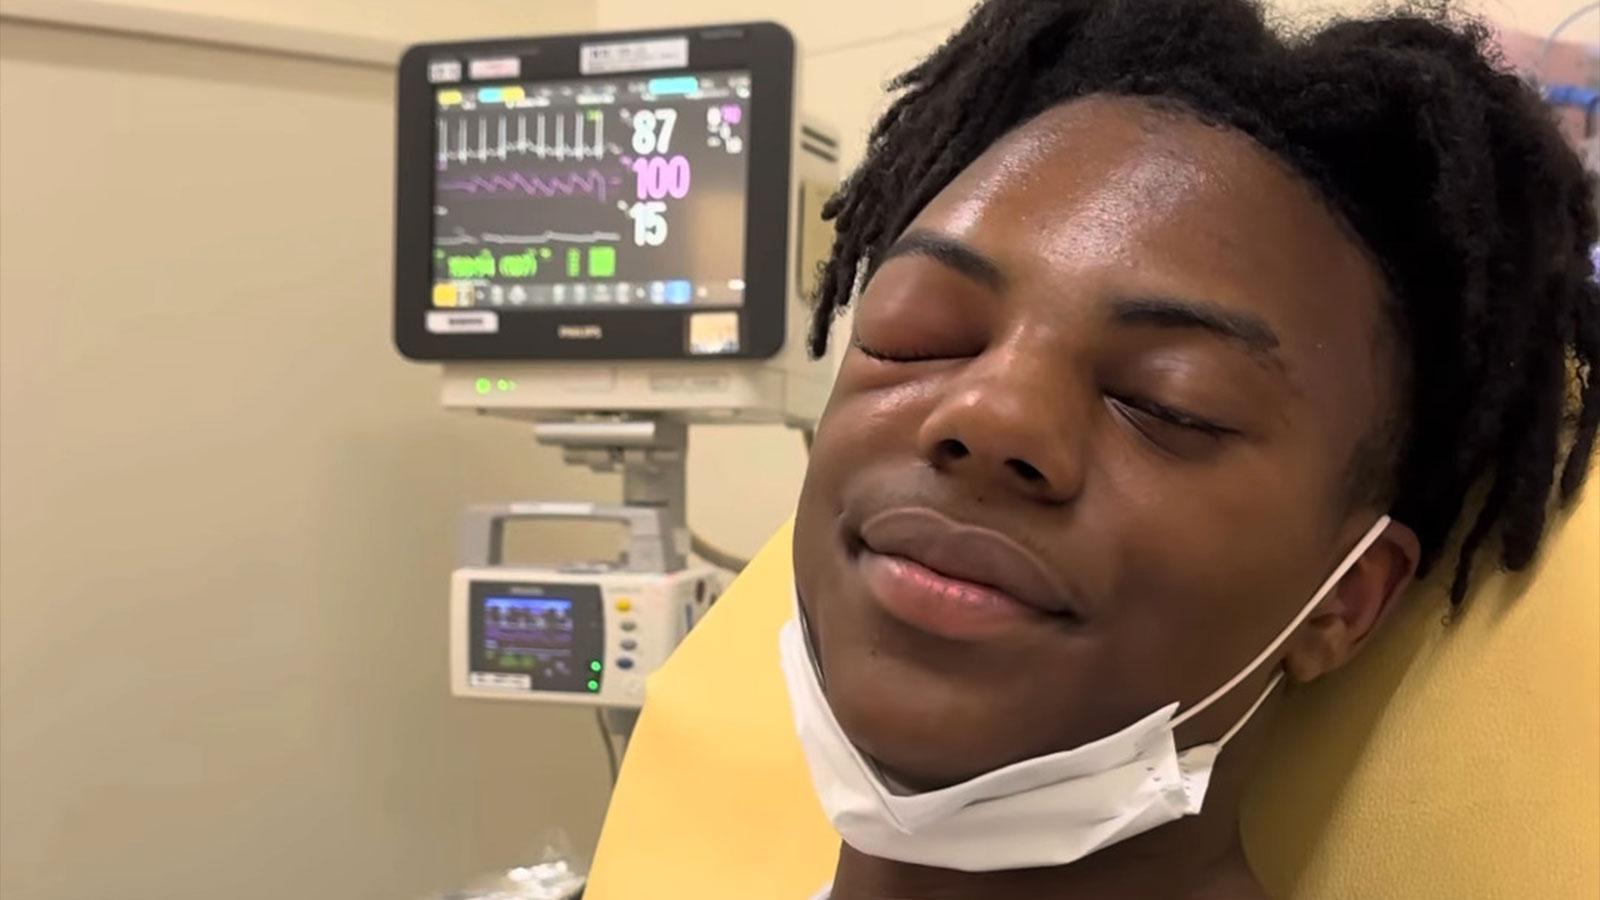 IShowSpeed lay in a hospital bed with a swollen right-eye